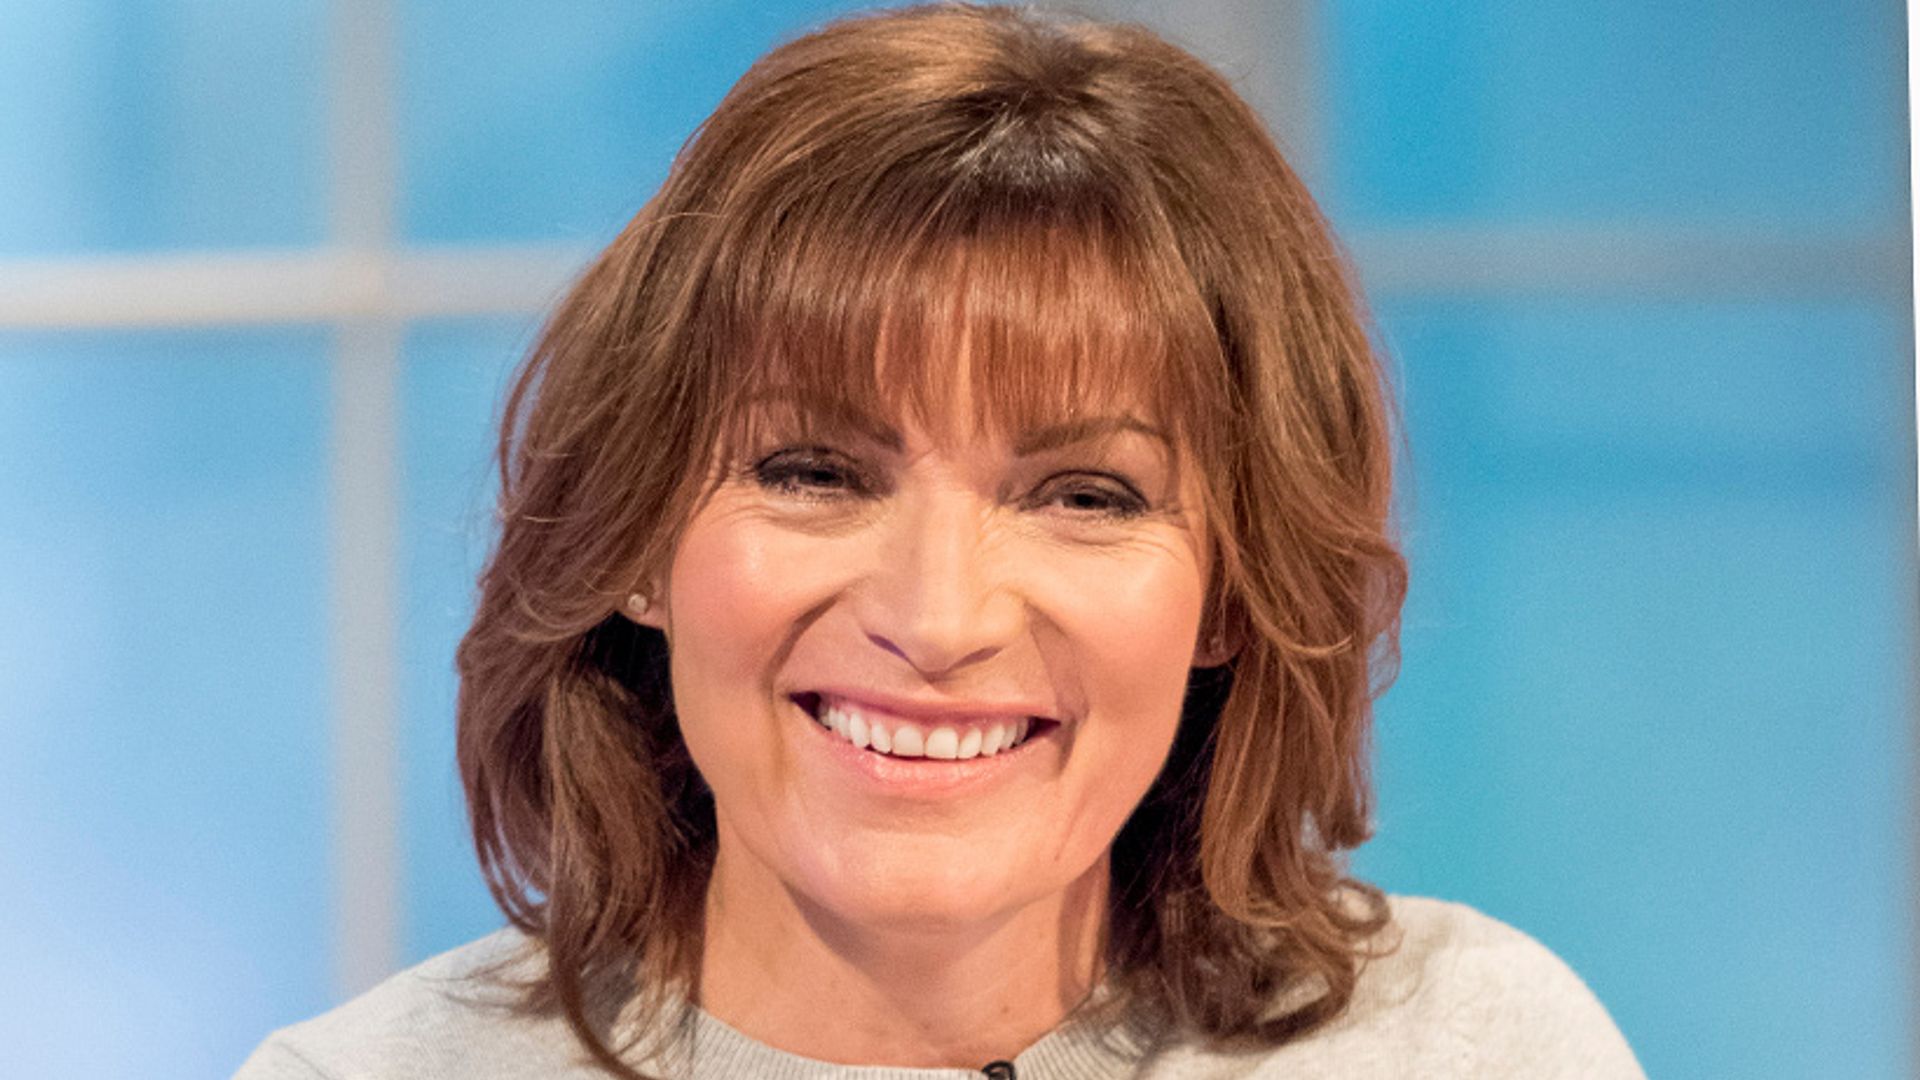 lorraine kelly red and white striped dress